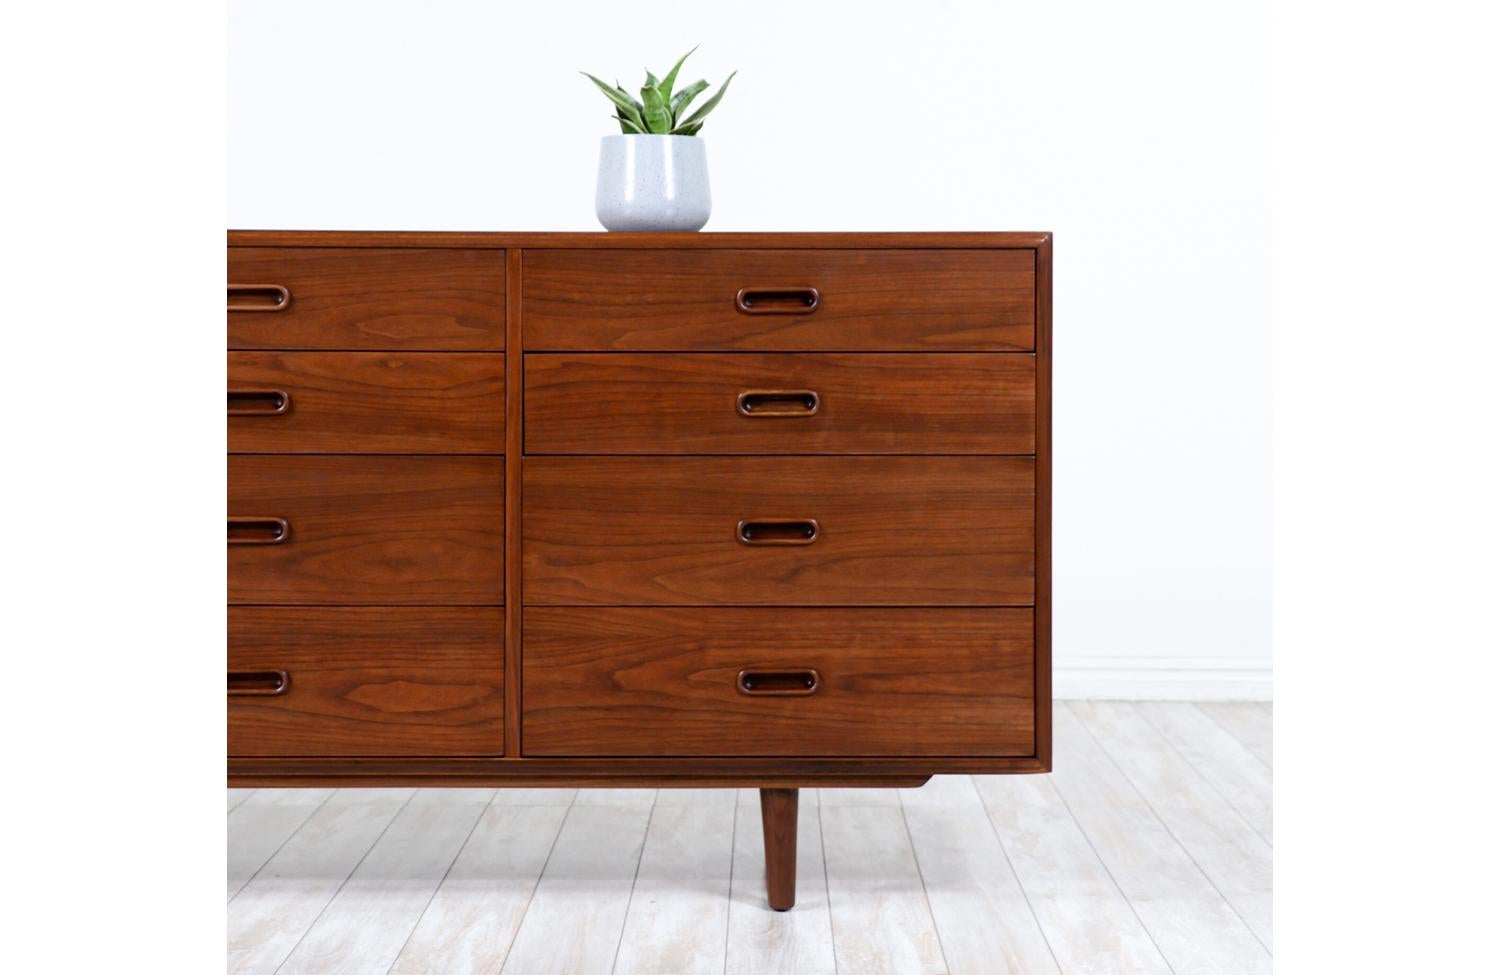 Mid-20th Century Jack Cartwright Walnut 12-Drawer Dresser for Founders Co.